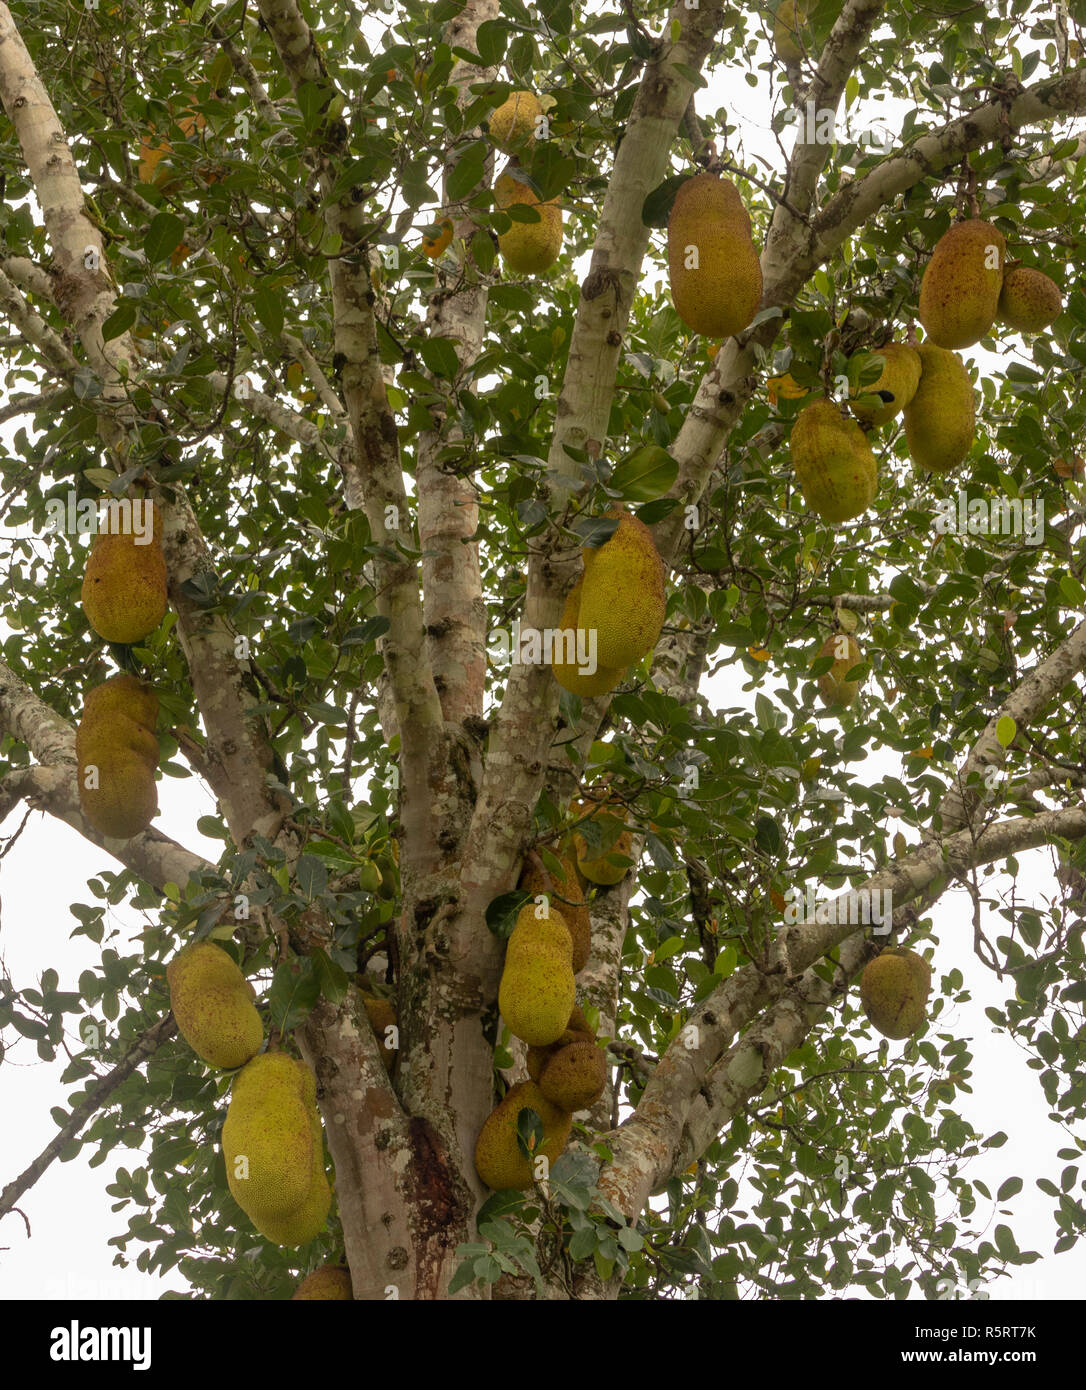 The durian plant and fruit hanging on a branch, Bogodi, Uganda, Africa Stock Photo